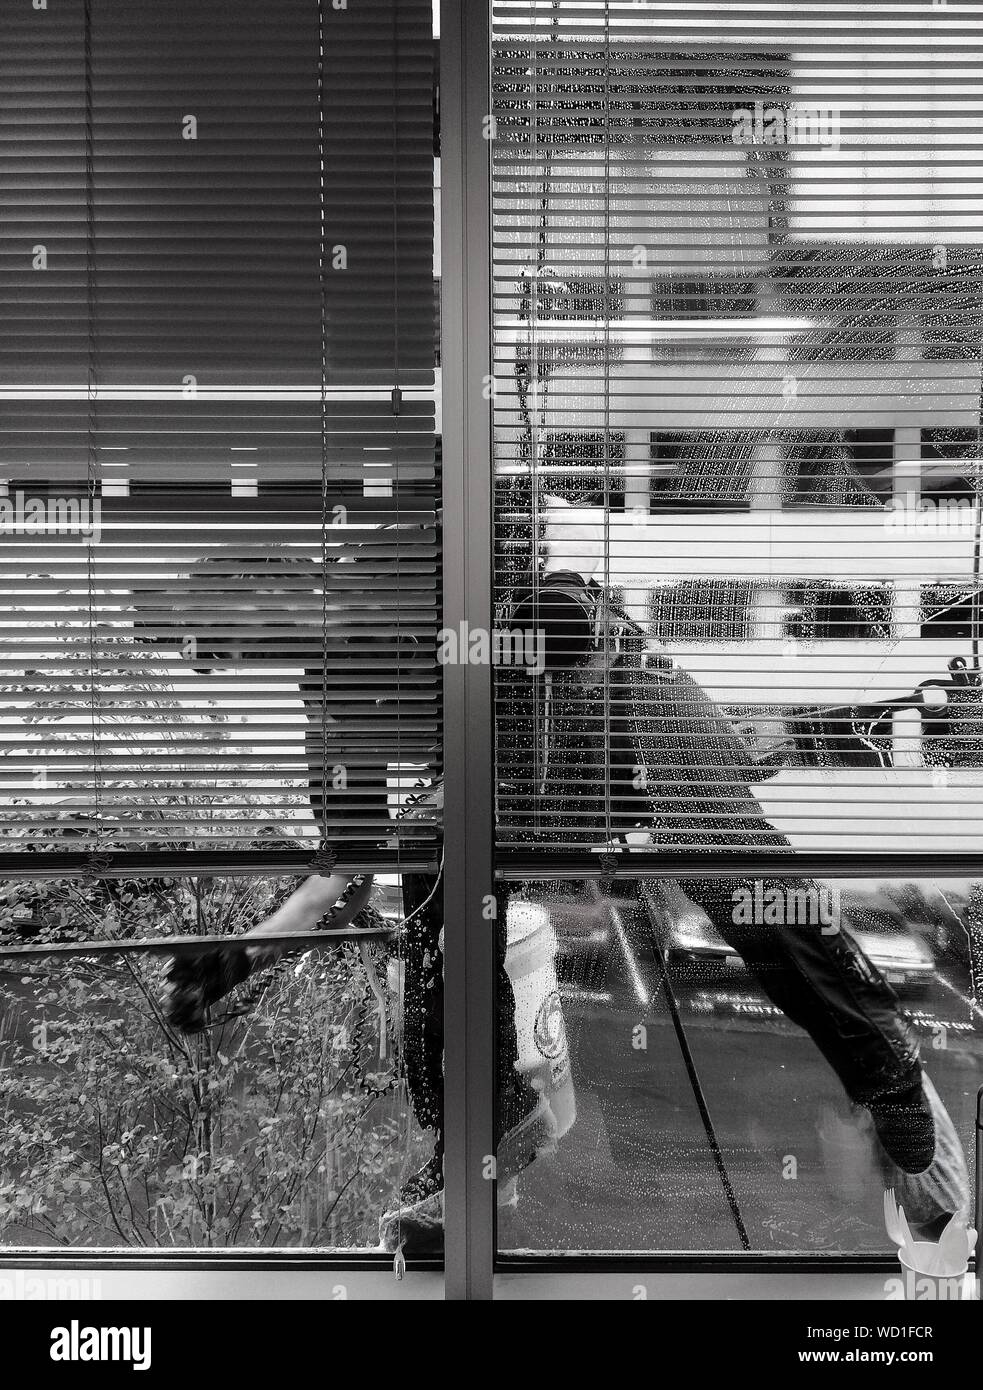 View Of Window Washer Cleaning Stock Photo